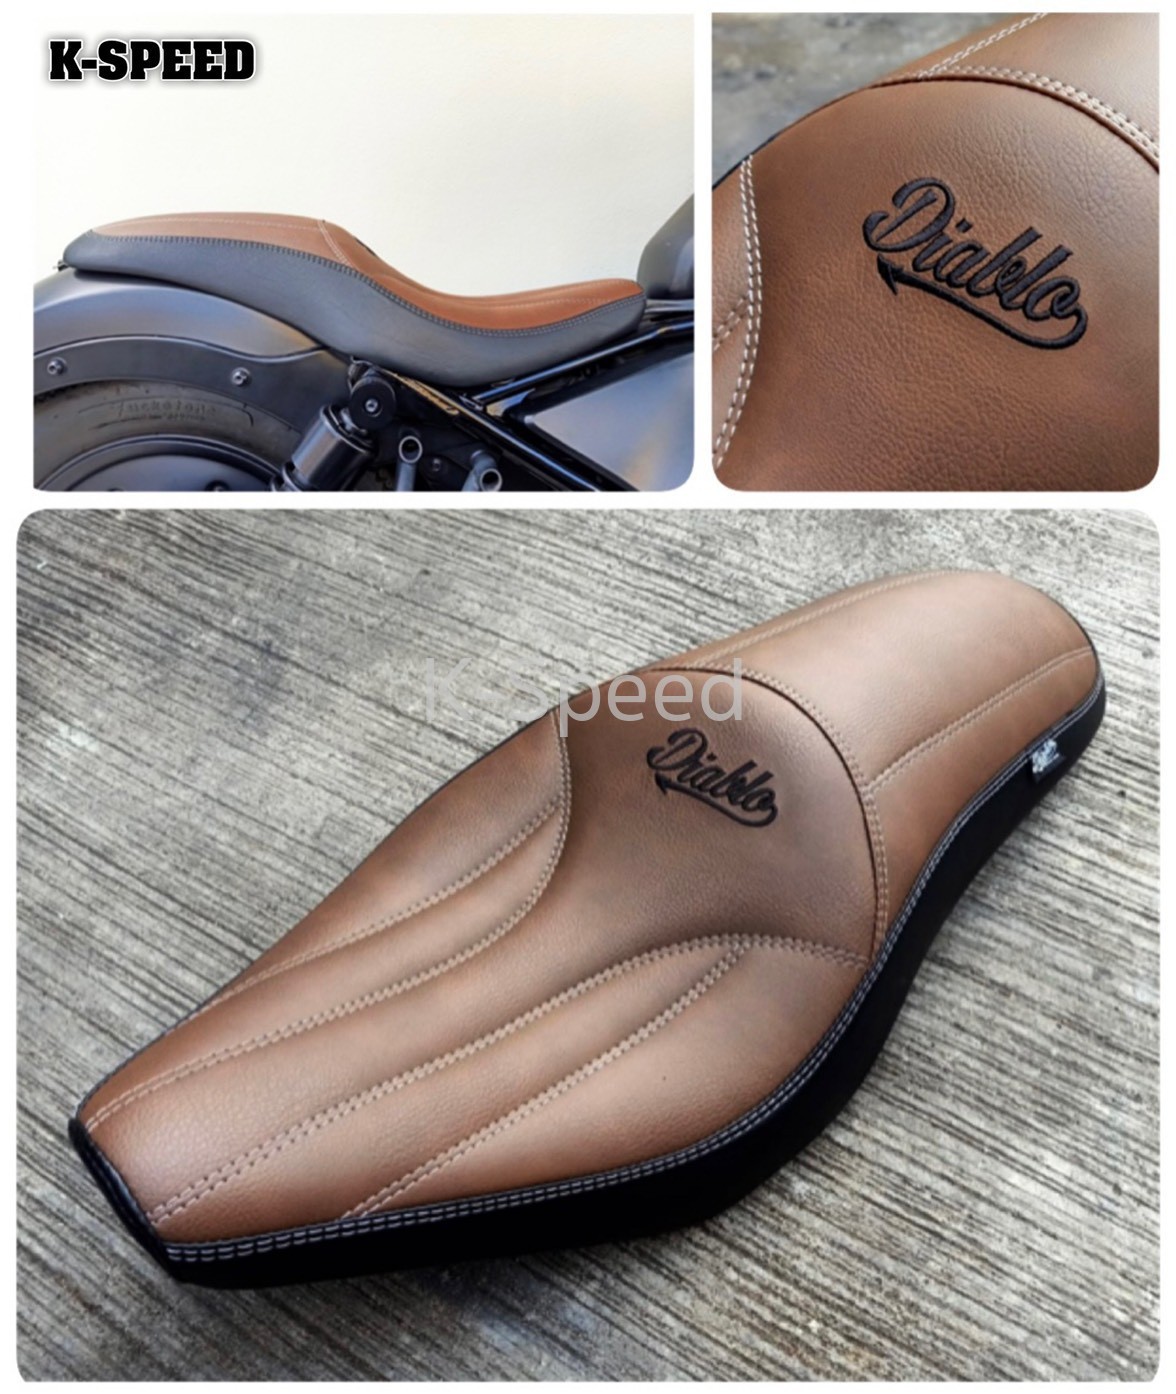 Diablo Special seat Two-Tone For Rebel 300 & 500